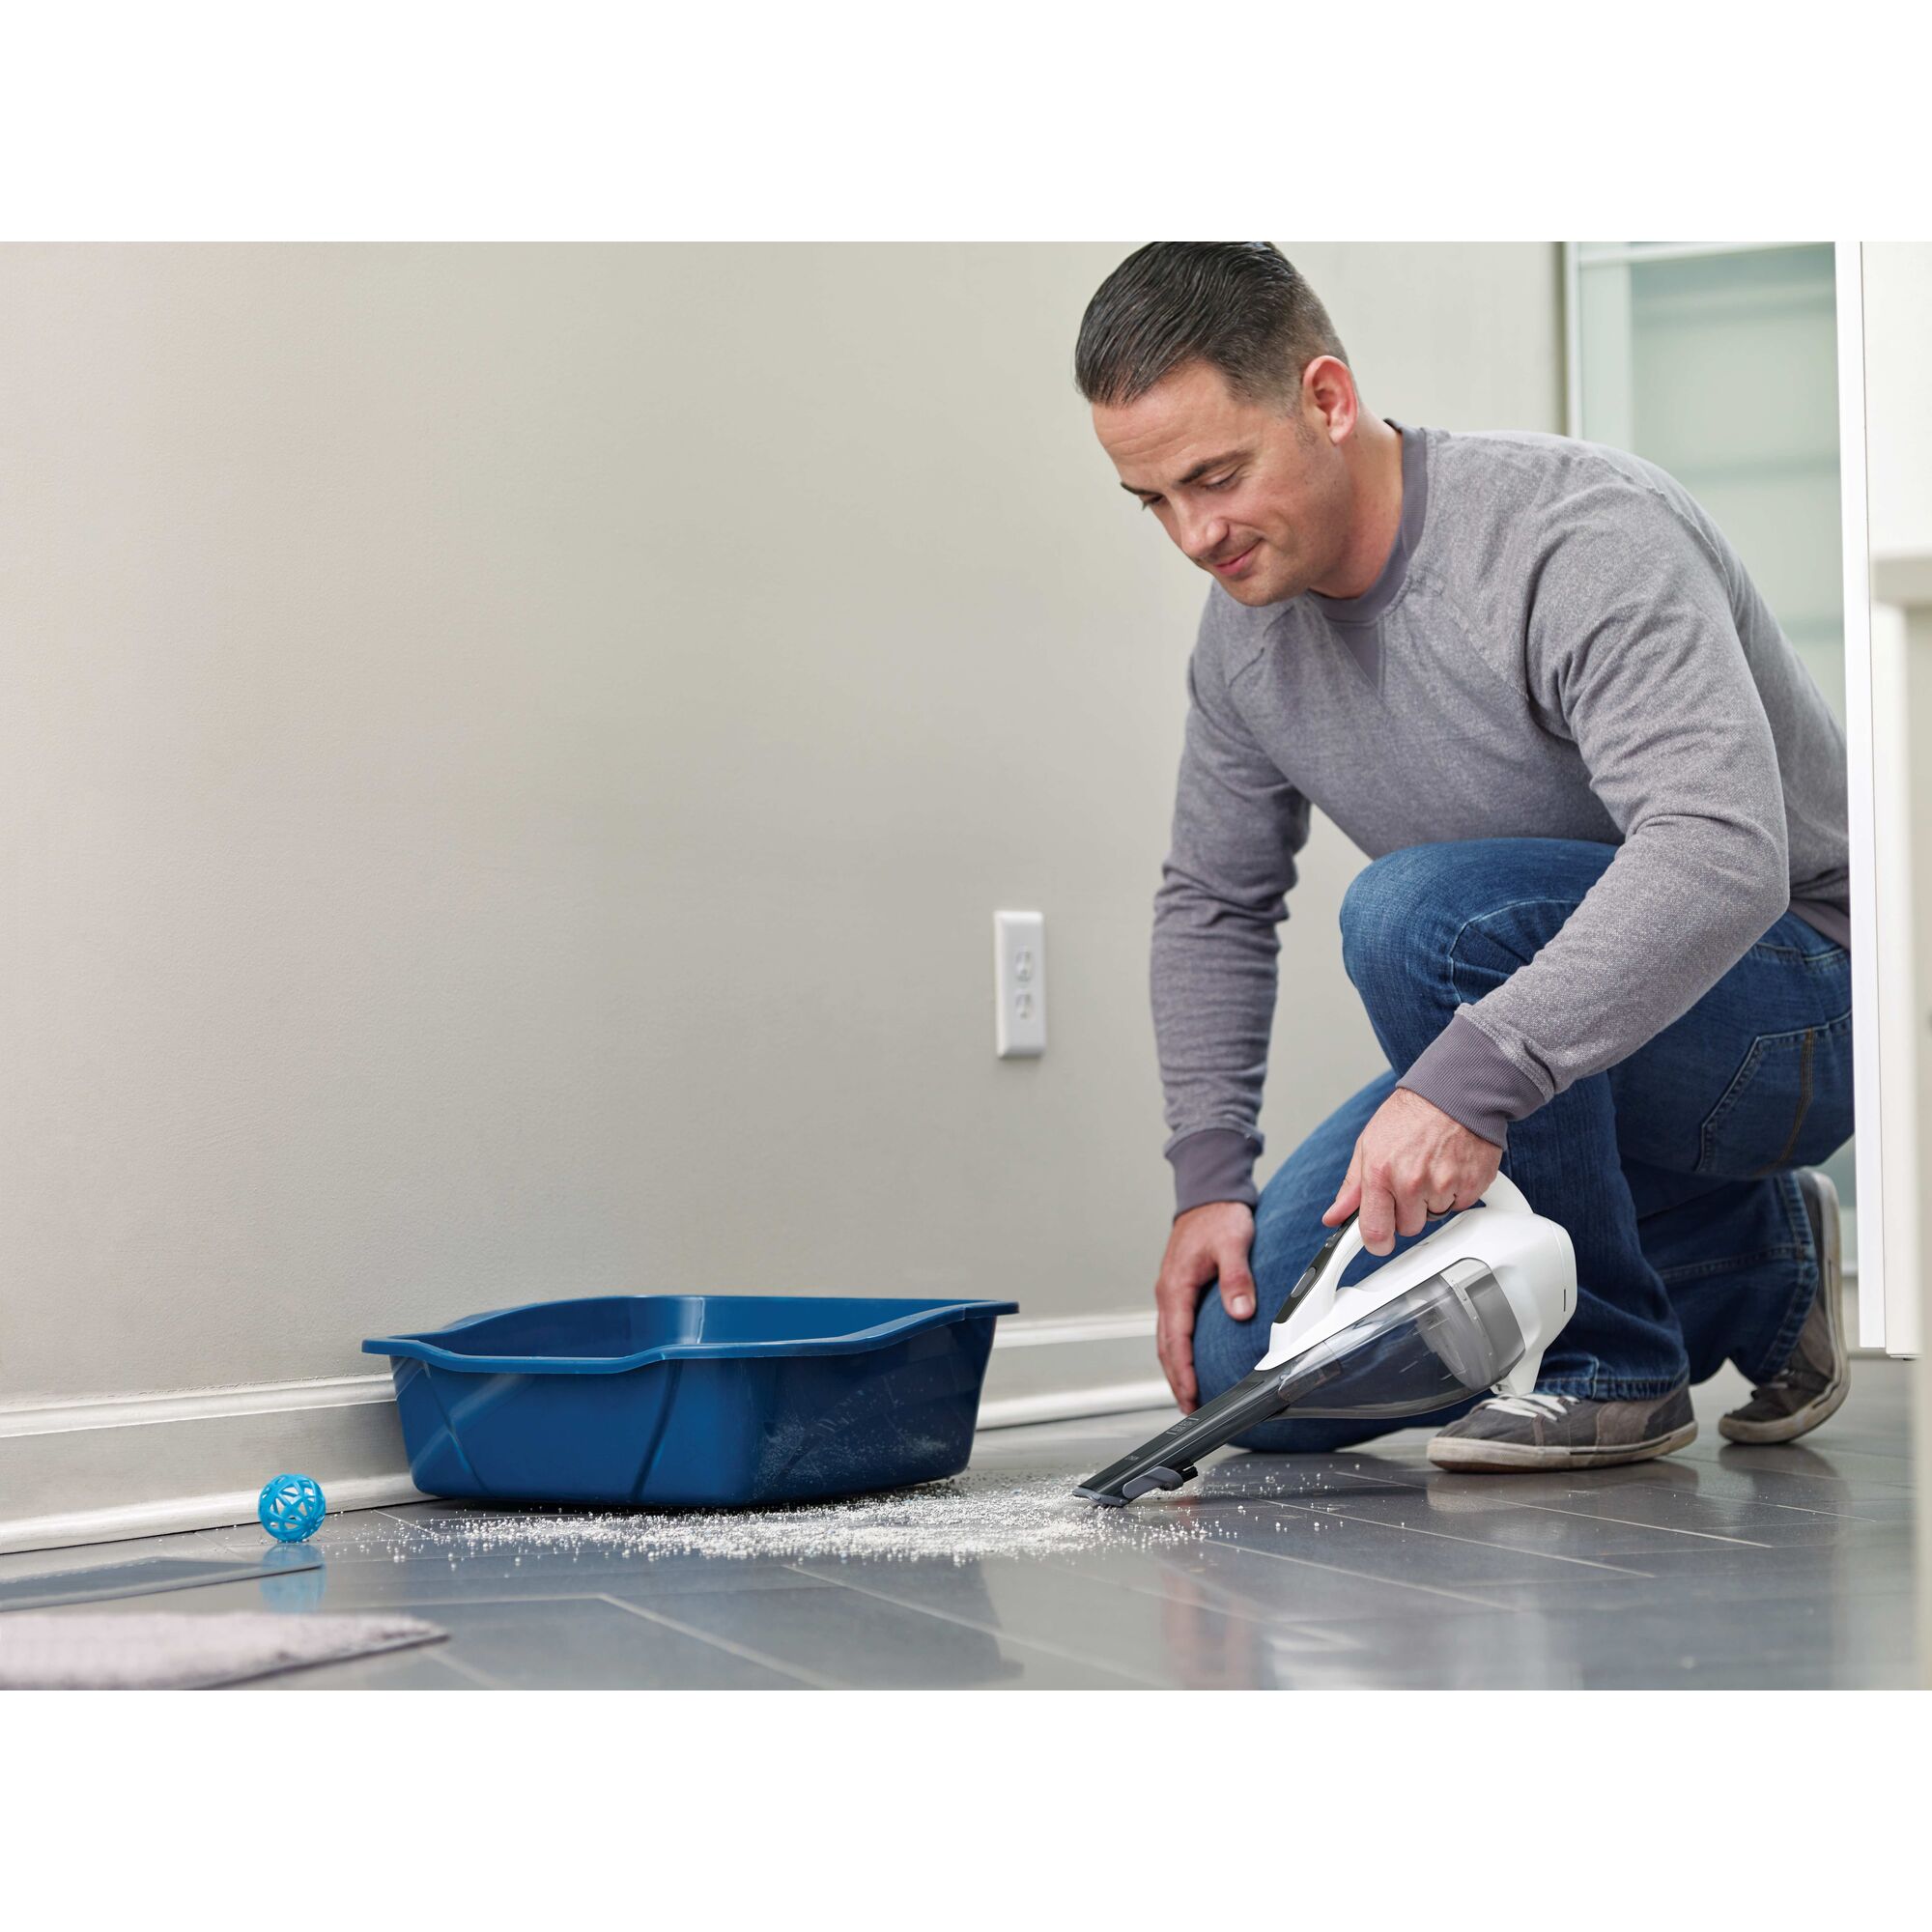 dustbuster Advanced Clean cordless hand vacuum being used by a person to clean tiled floor.